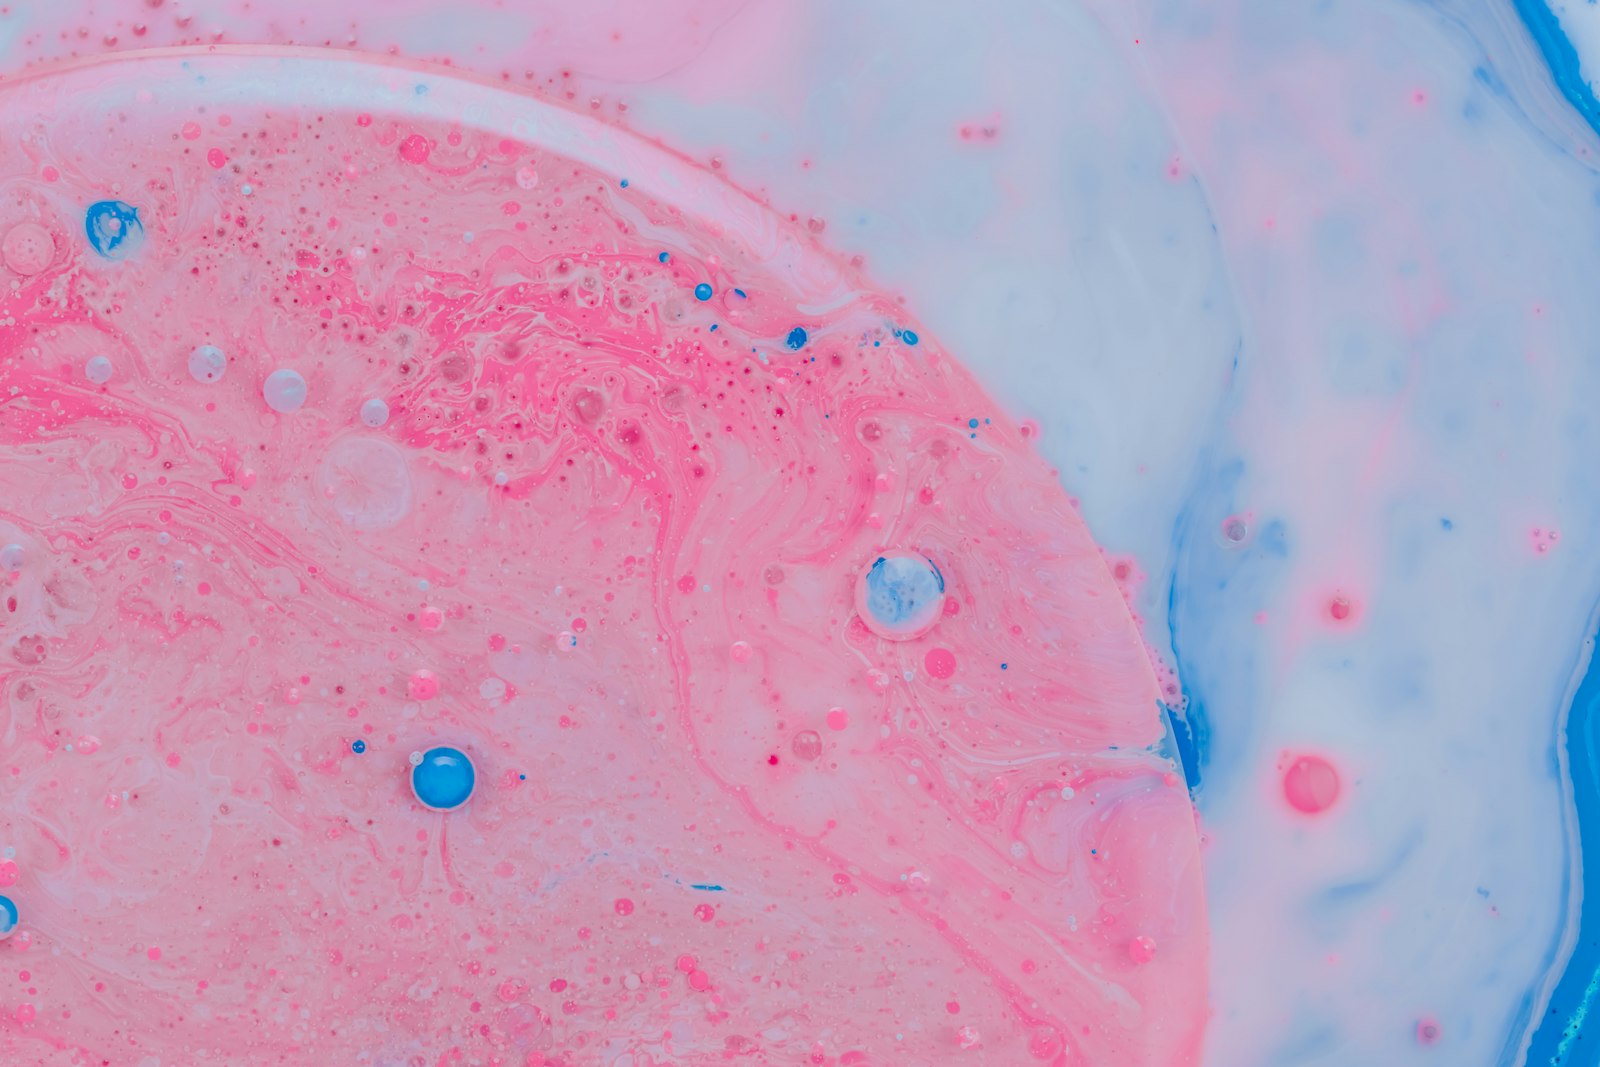 Sigma 105mm F2.8 EX DG OS HSM sample photo. Pink and blue abstract photography